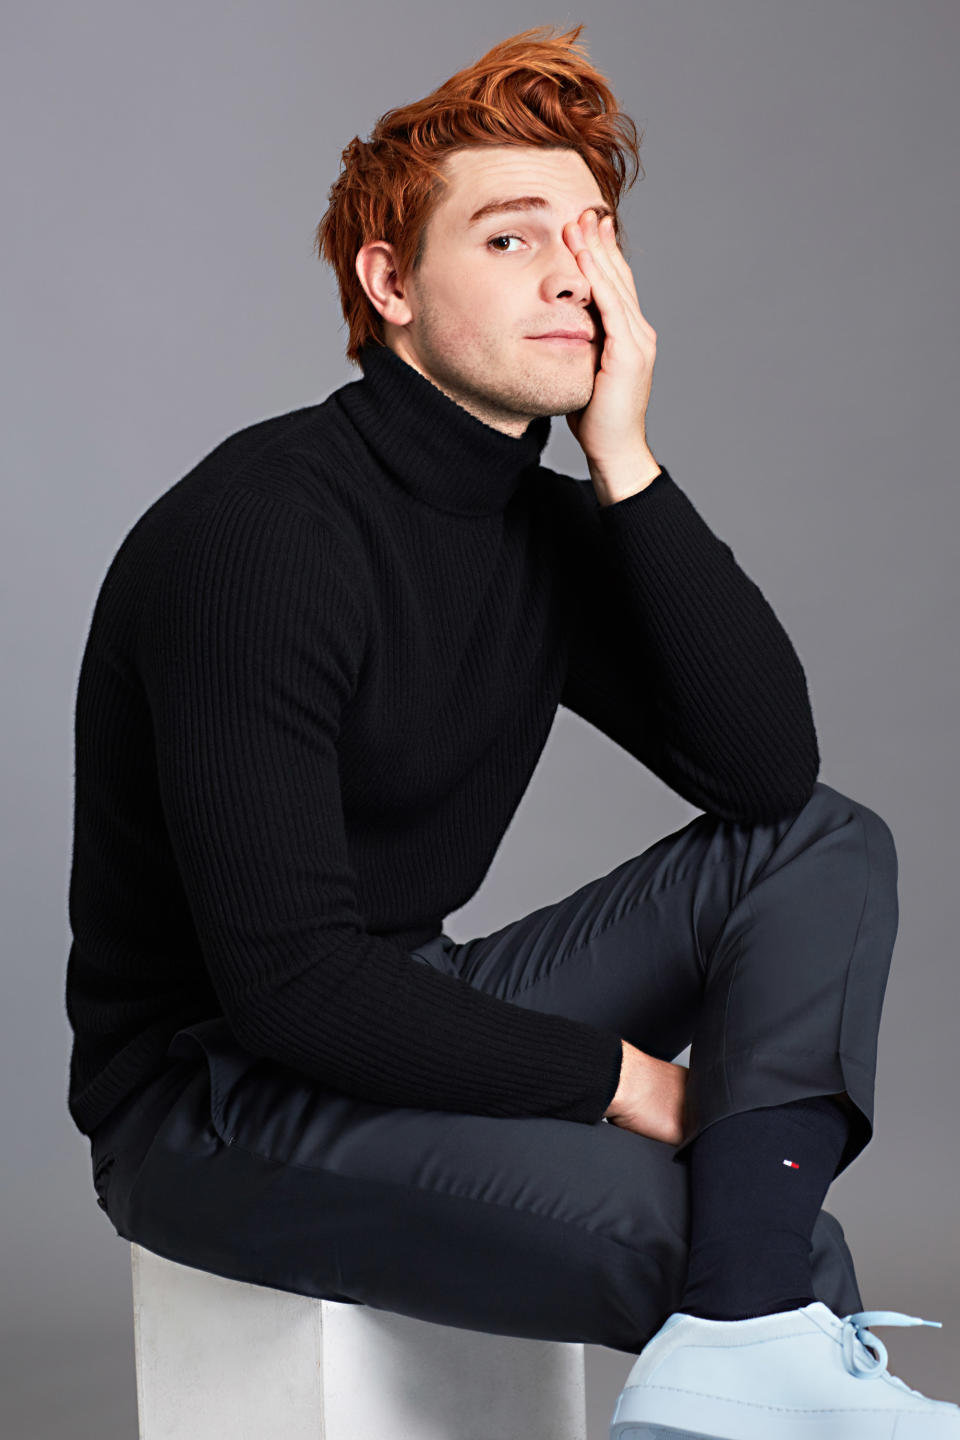 <p>Turtleneck sweater by Theory, trousers and socks by Tommy Hilfiger, sneakers by Koio.</p>